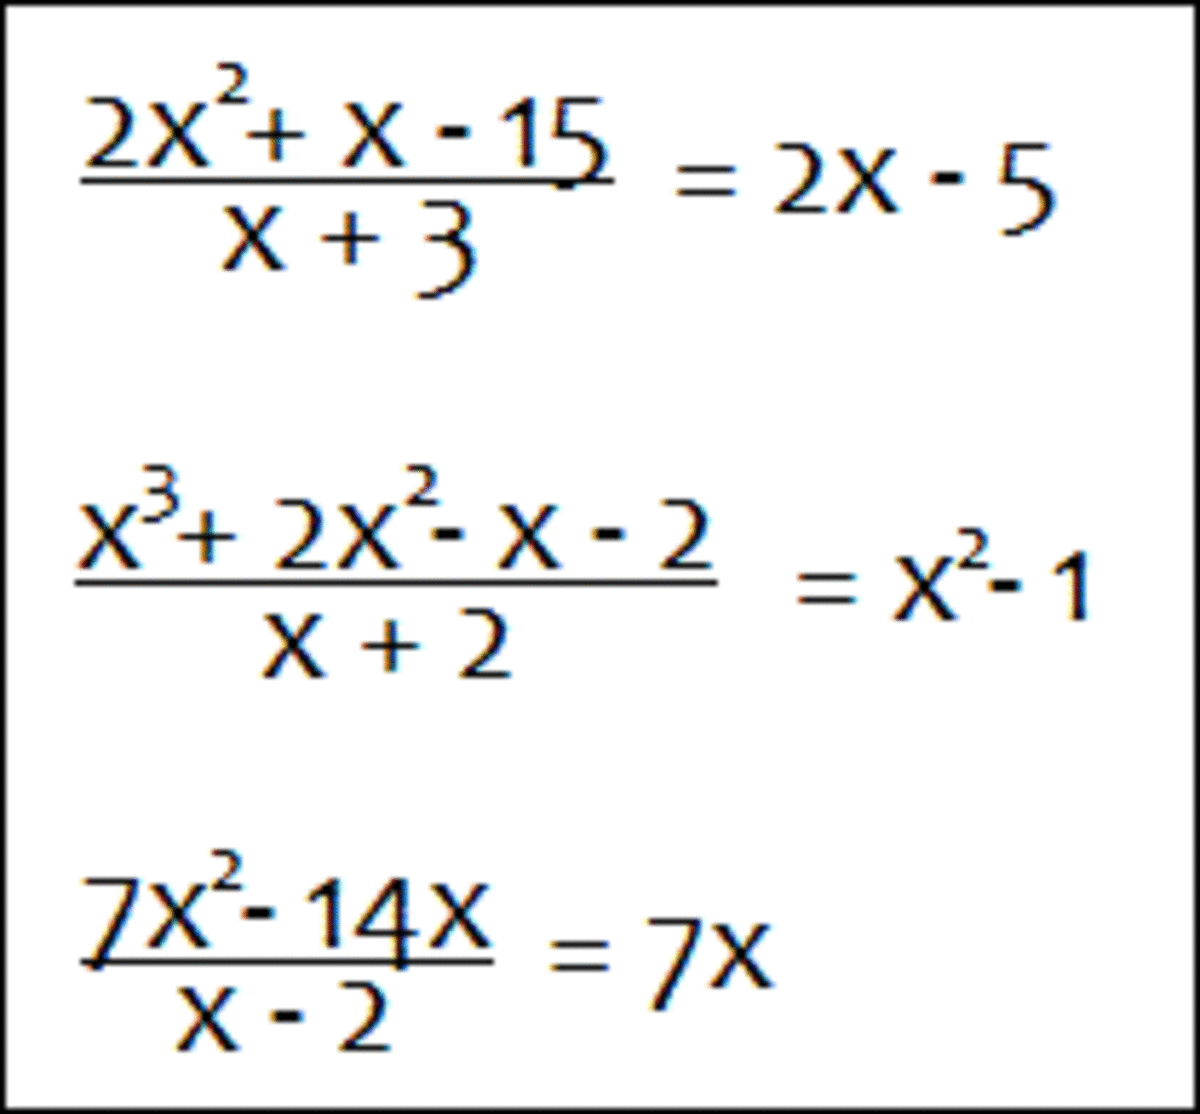 multiply-polynomials-with-examples-foil-grid-methods-owlcation